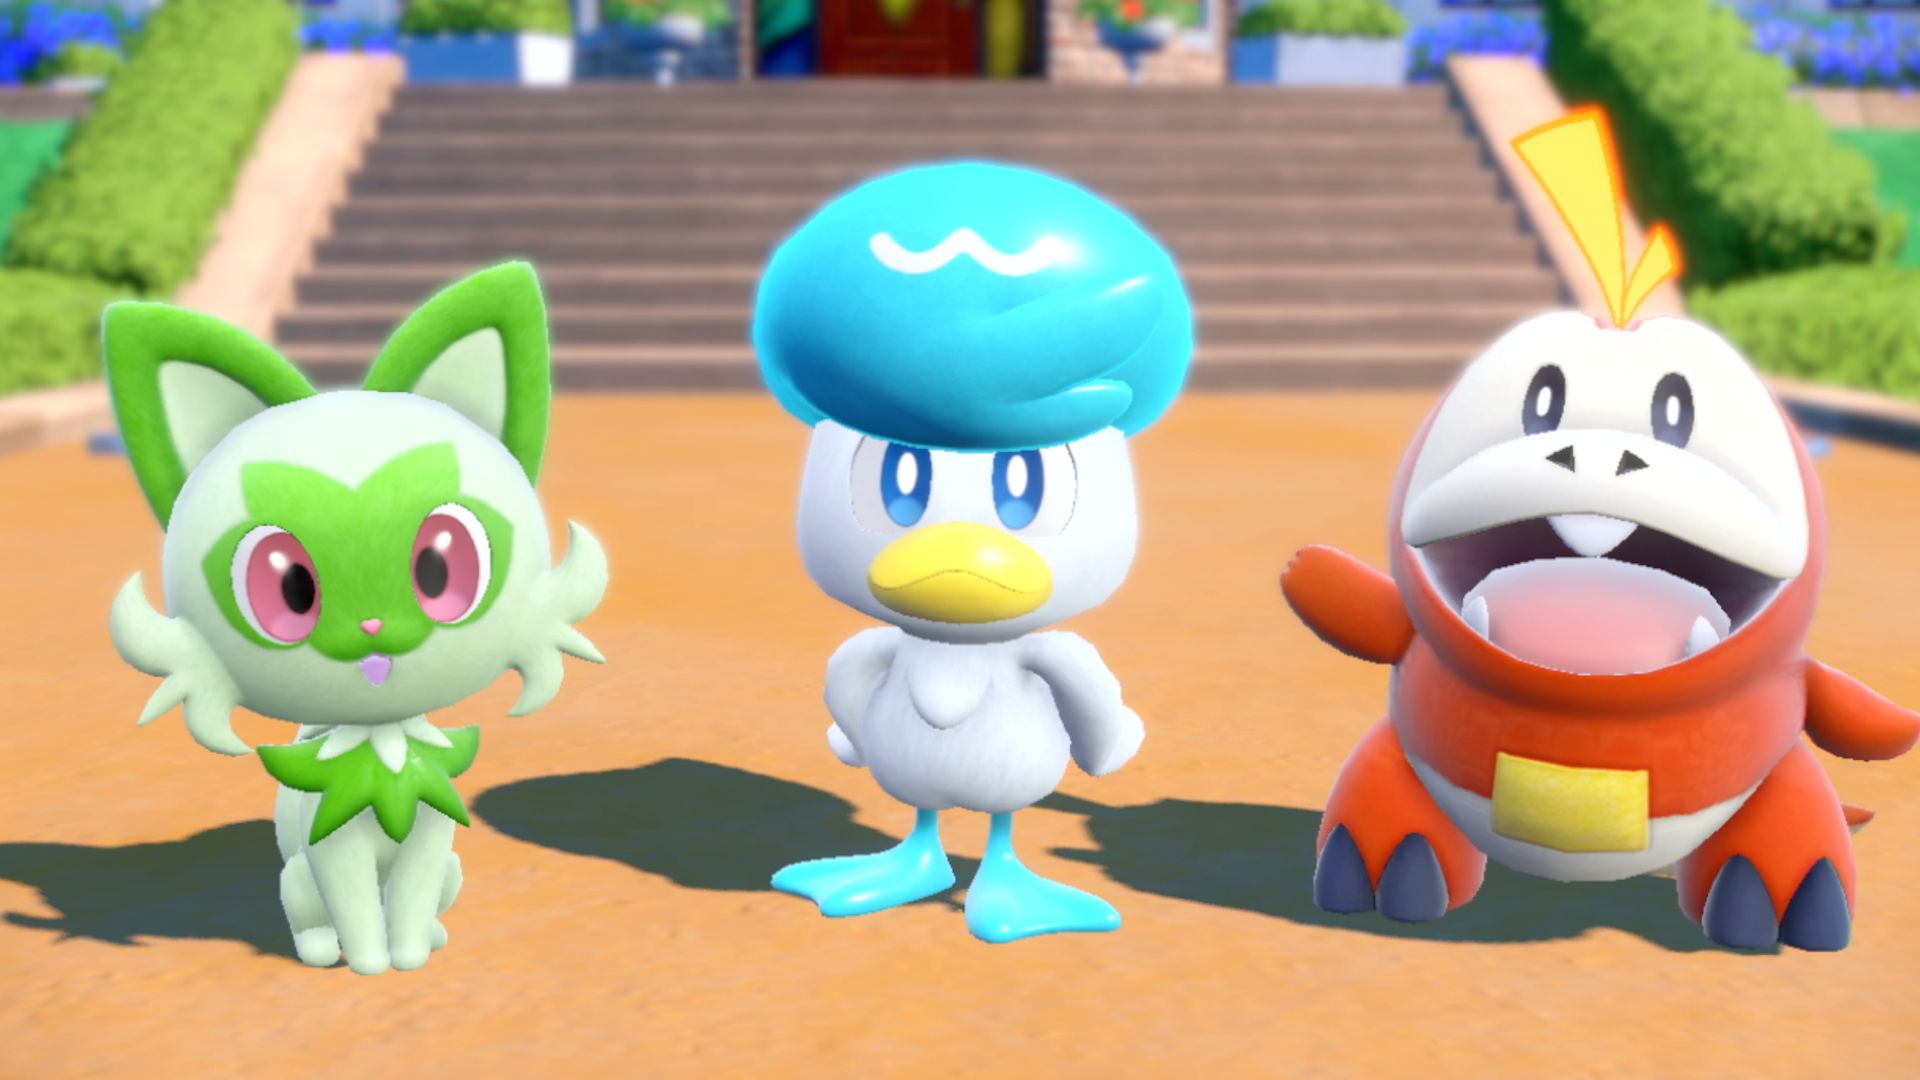 Sprigatito, Quaxly, and Fuecoco in 'Pokémon Scarlet' and 'Violet' for our article about the August 2022 Pokémon Presents. The three starters are standing next to one another in front of a staircase.